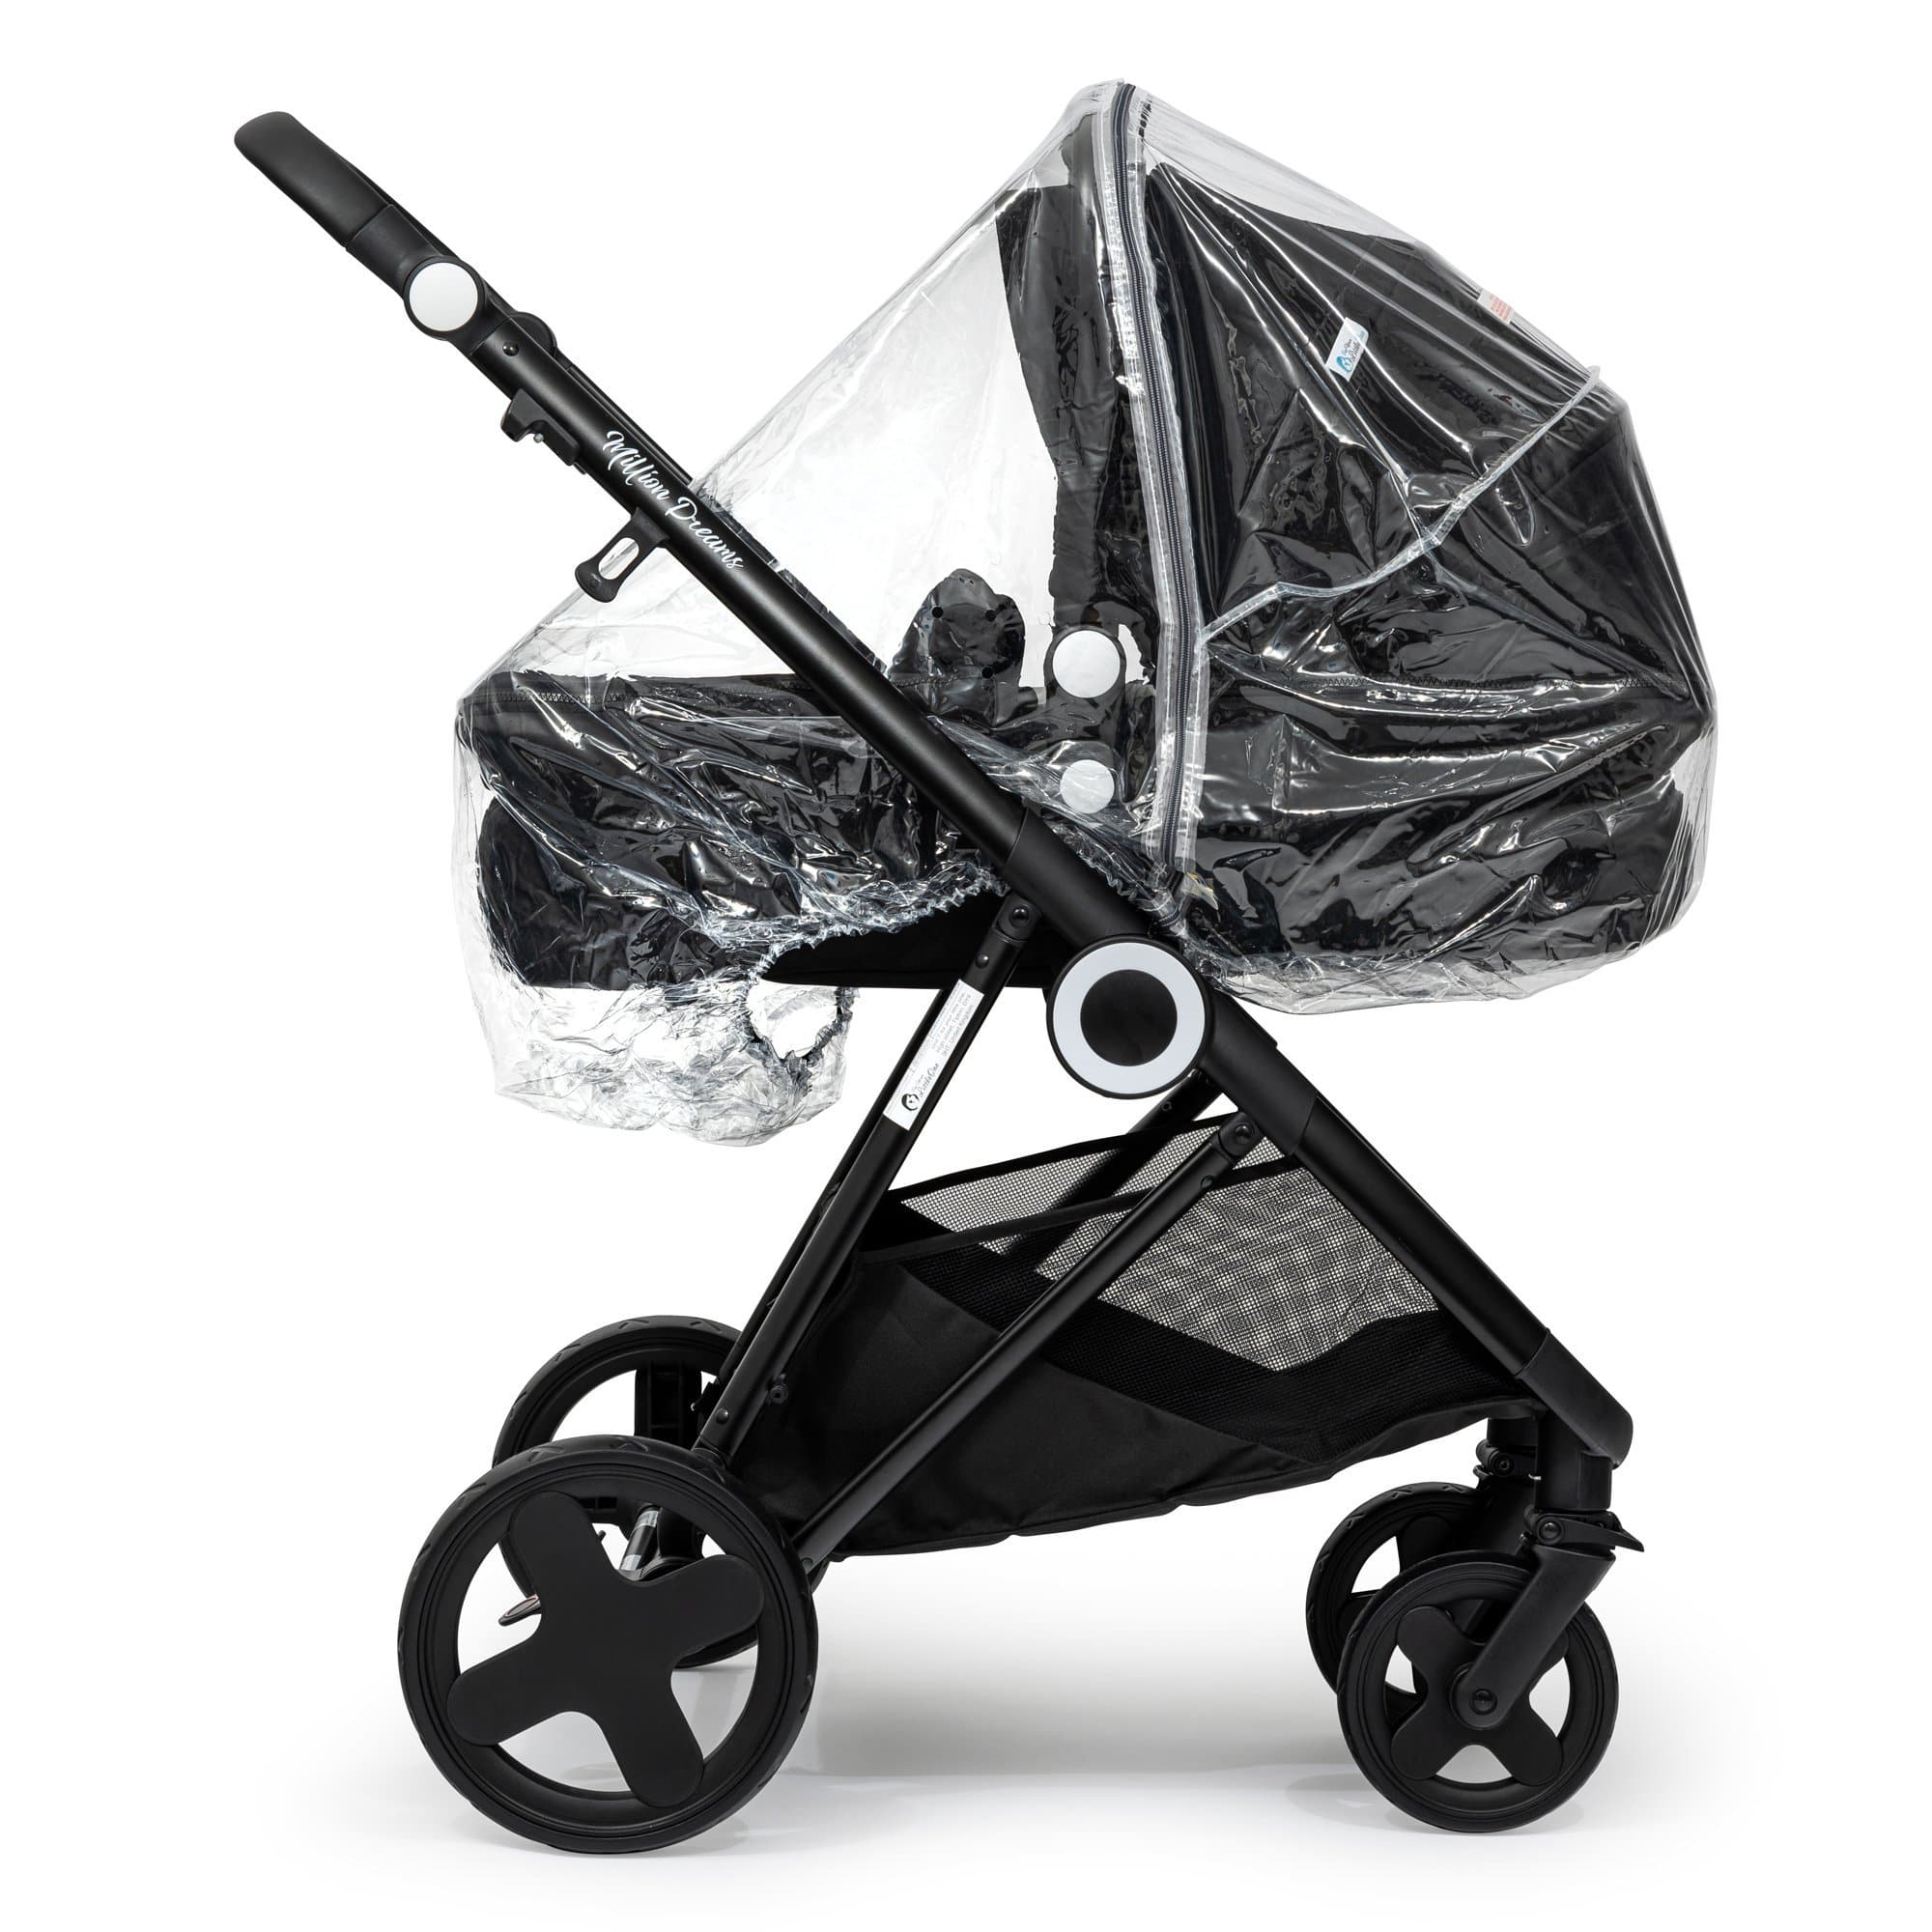 2 in 1 Rain Cover Compatible with Joie - Fits All Models - For Your Little One